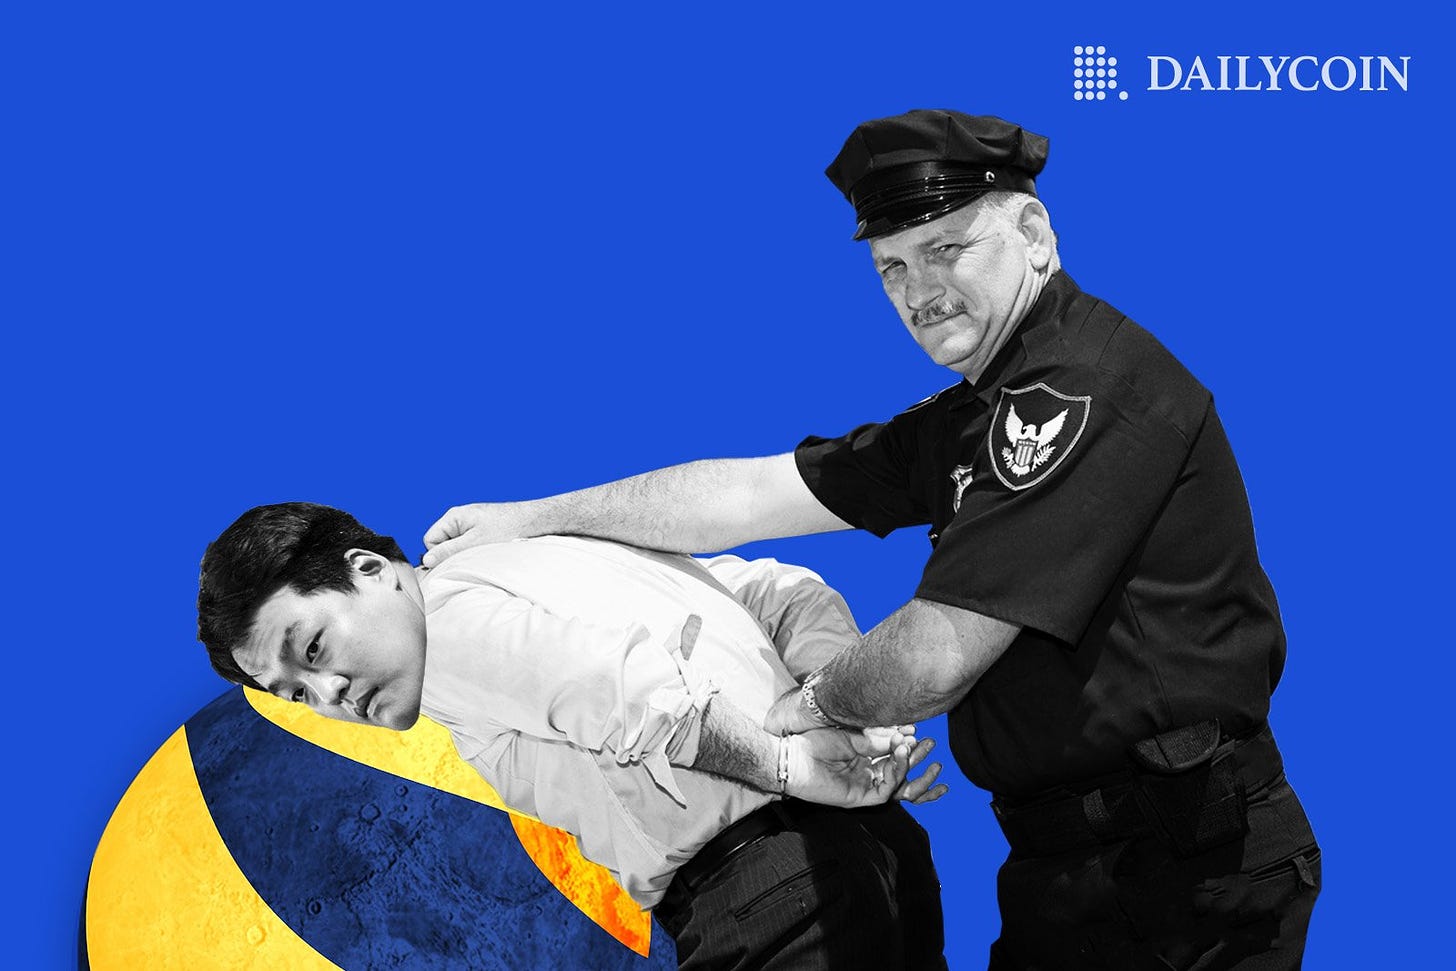 Terra (LUNA) Founder Do Kwon Arrested In Montenegro Airport - DailyCoin